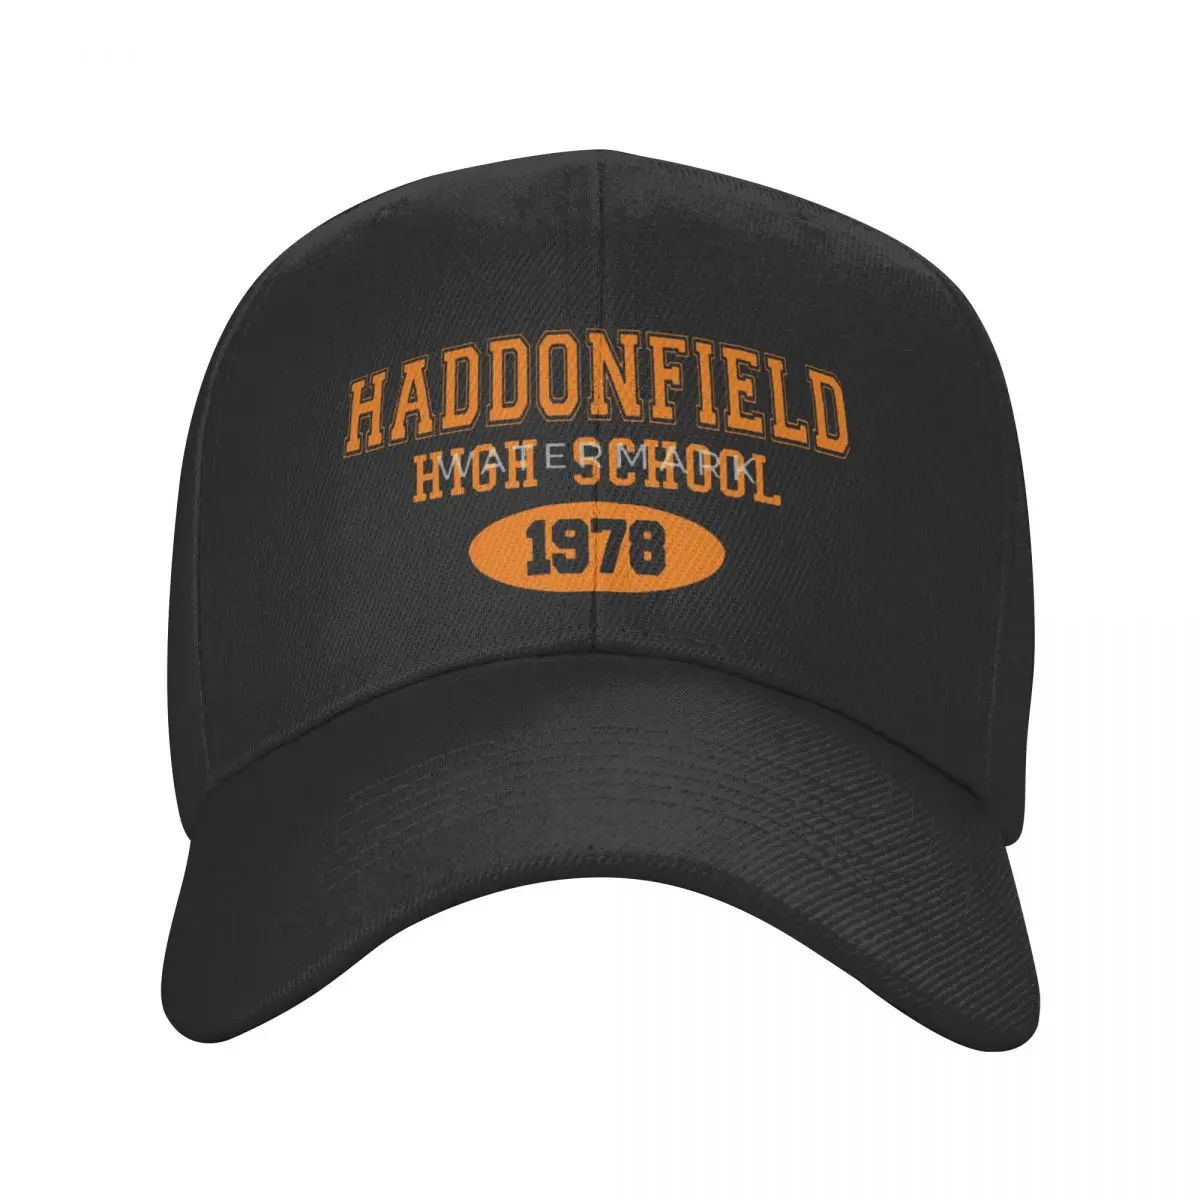 

Haddonfield High Class Of 1978 Casquette, Polyester Cap Fashionable Unisex Gift Nice Gift